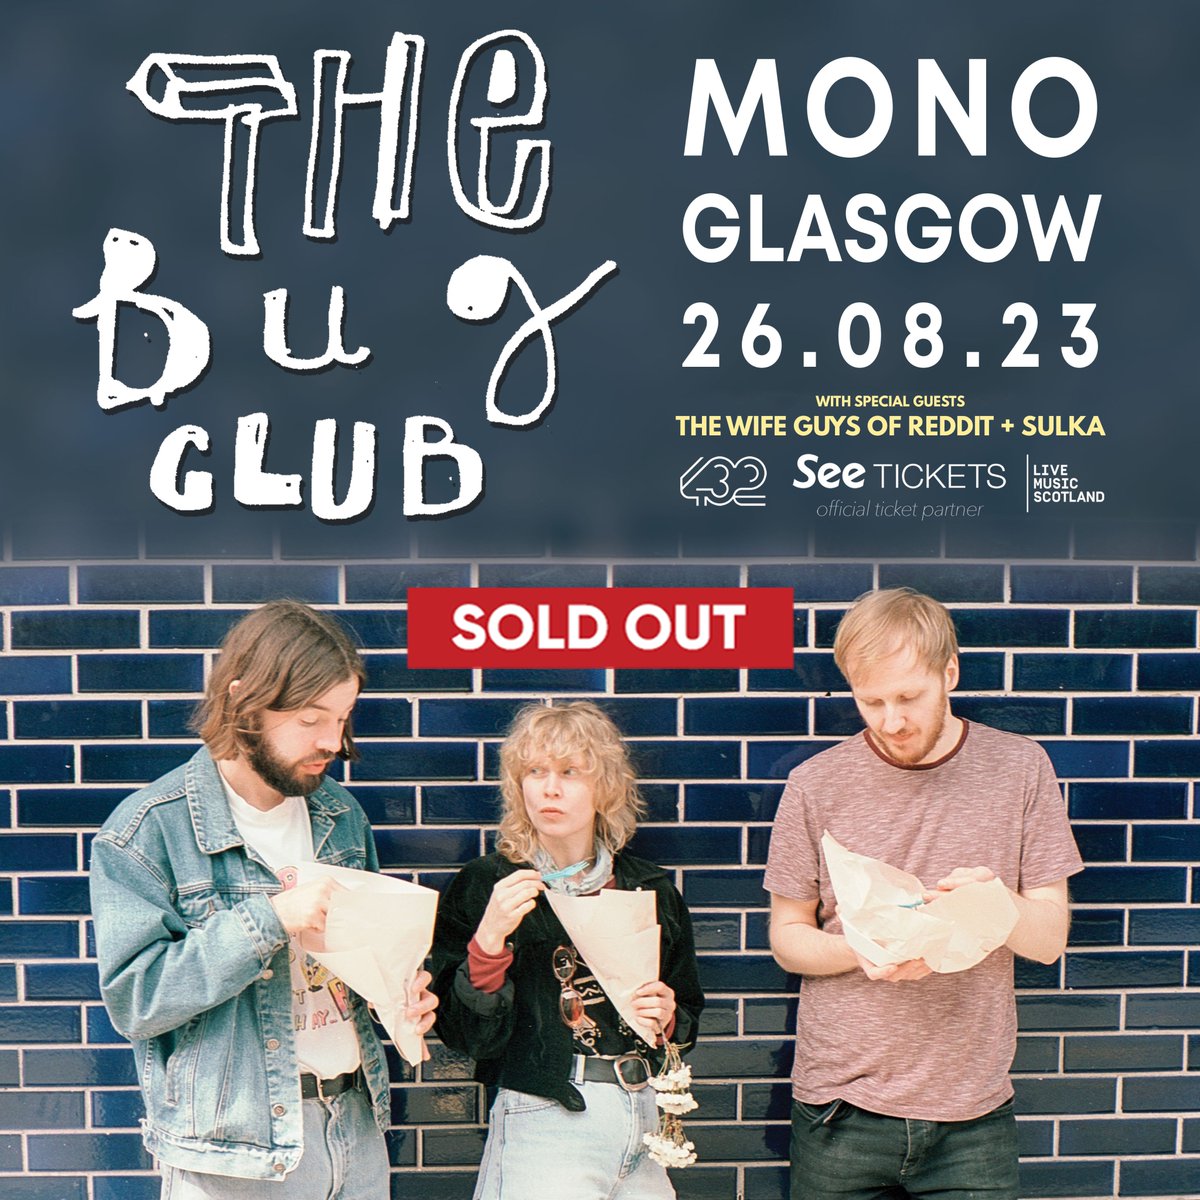 Oyoy people our @Monoglasgow gig has now SOLD OUT get ya glaz rags on and get yaself a lovely cheesey pizza of the veeg kind and dance it all off while listening to us yet again try and impress the masses. It's no kumbaya but it'll do xxxxxx